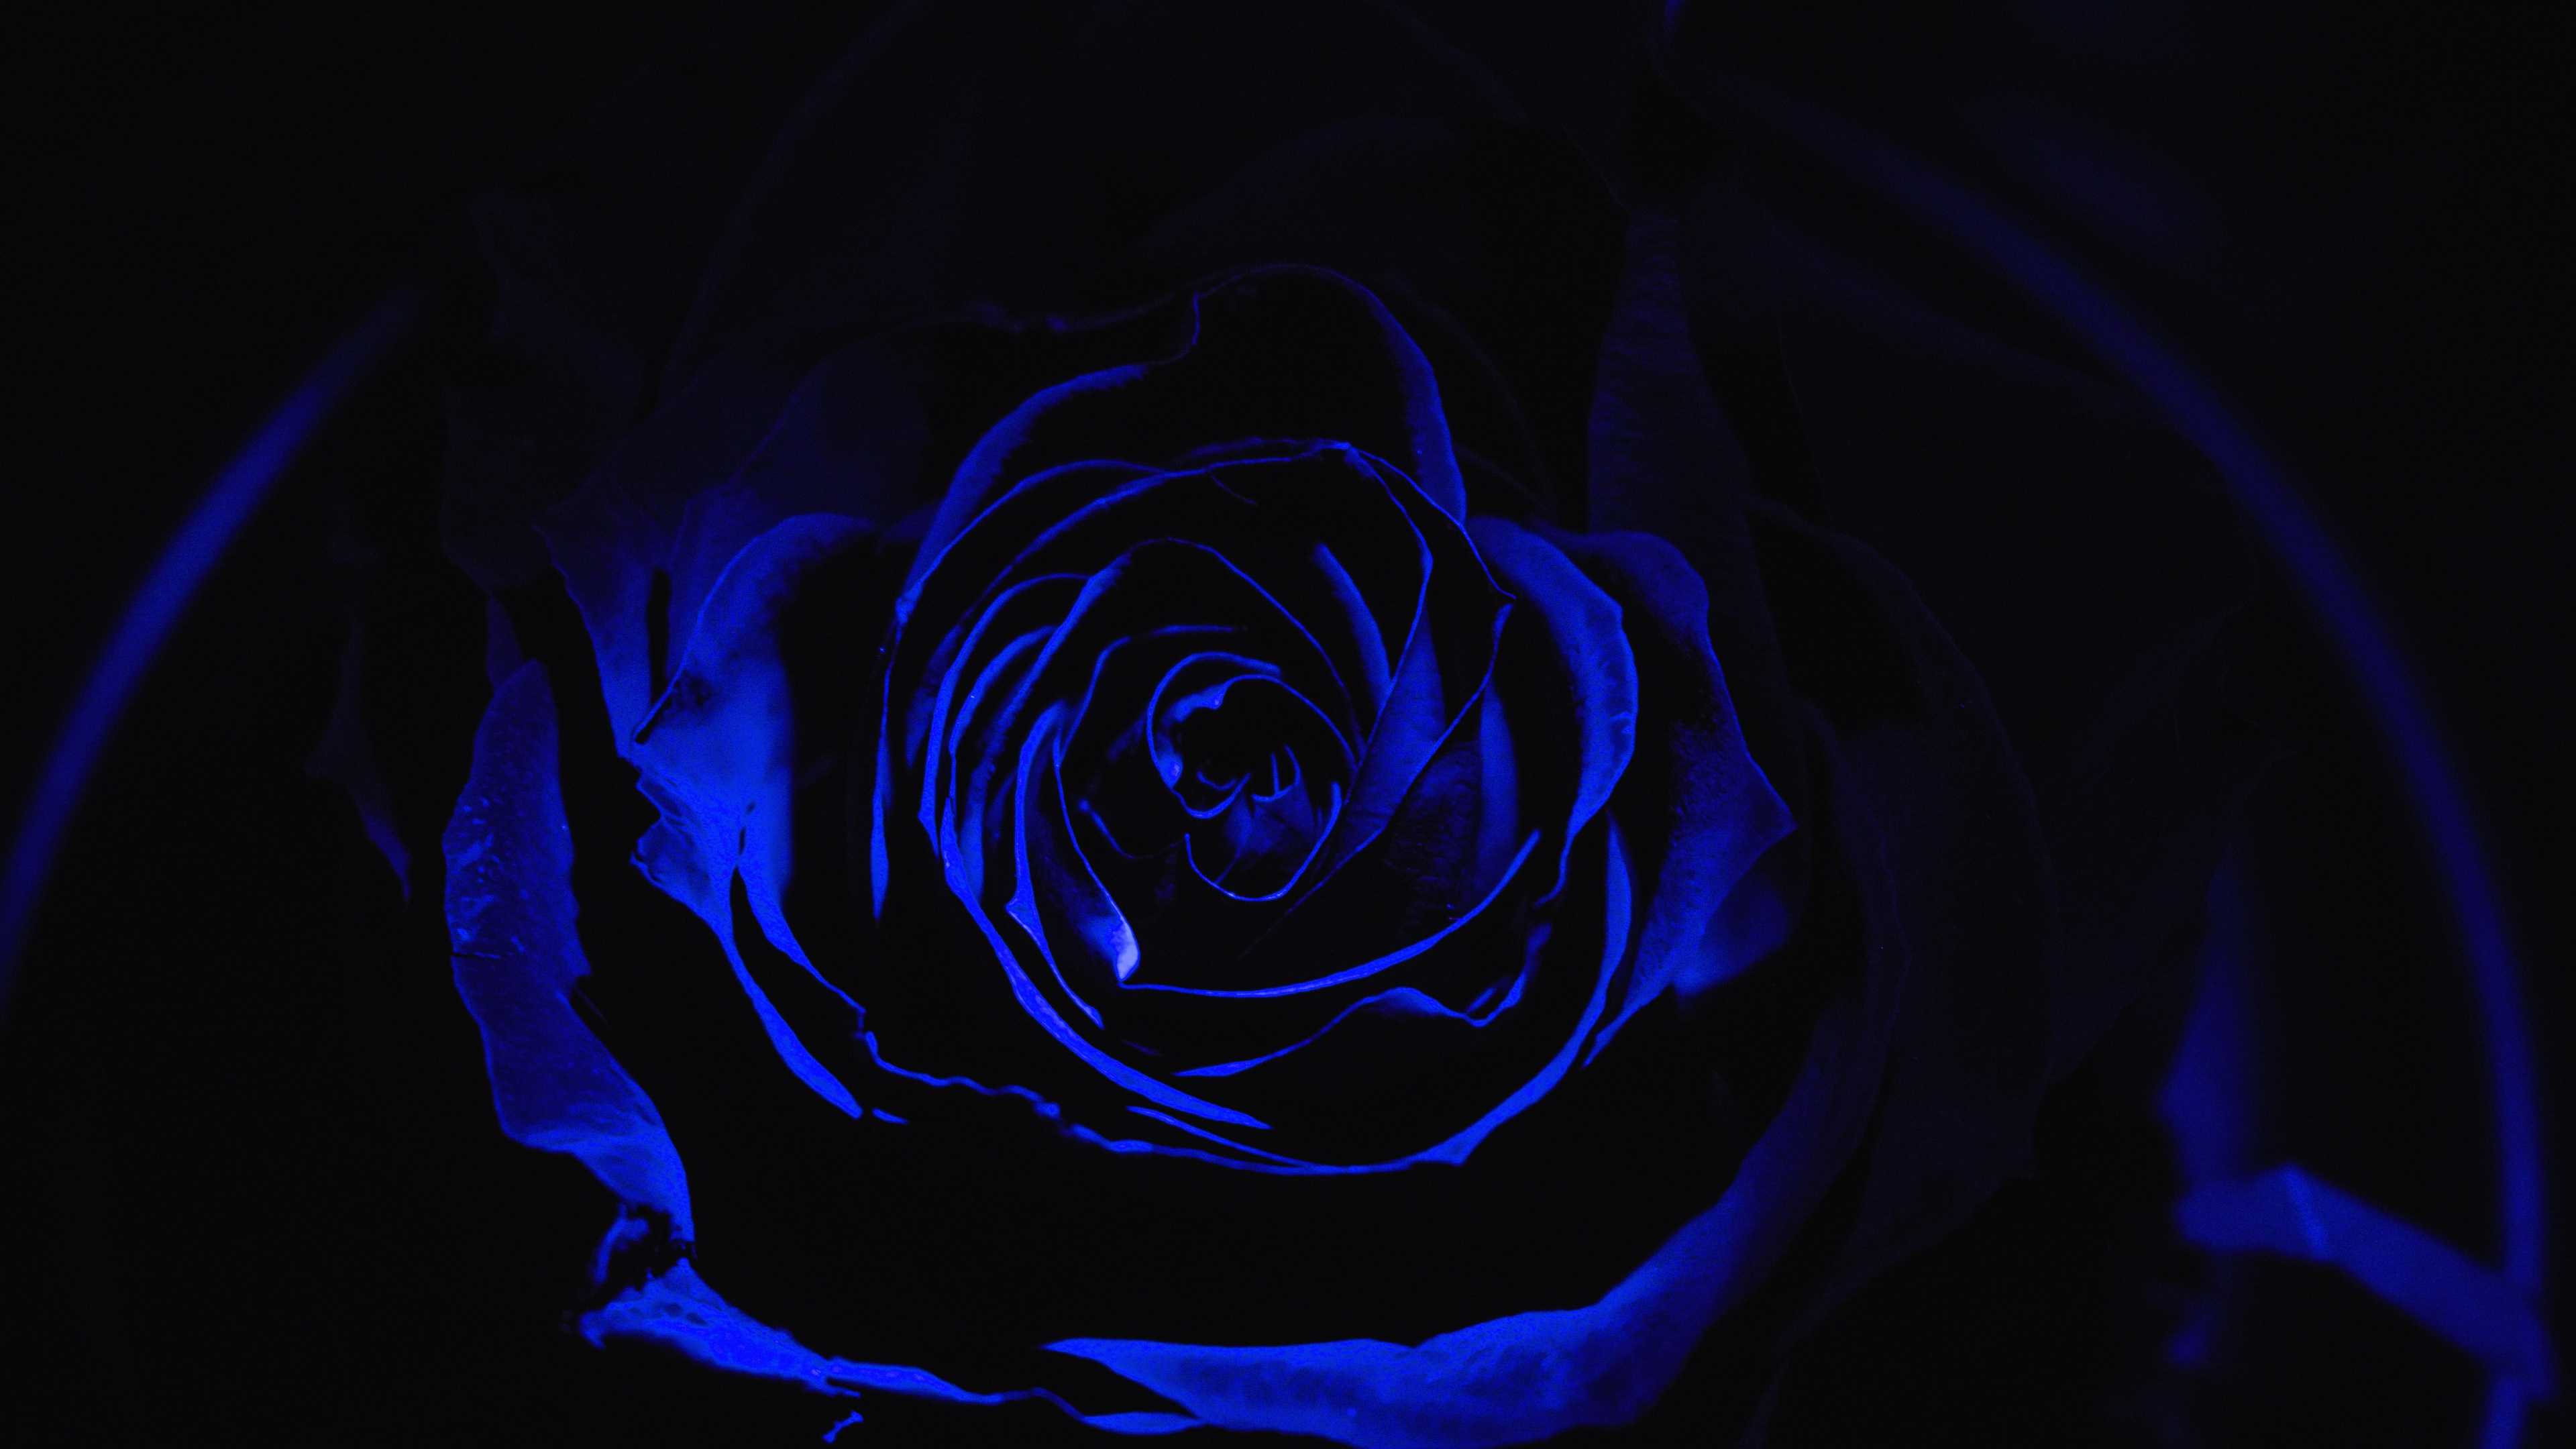 Blue Rose in Close up Photography. Wallpaper in 3840x2160 Resolution